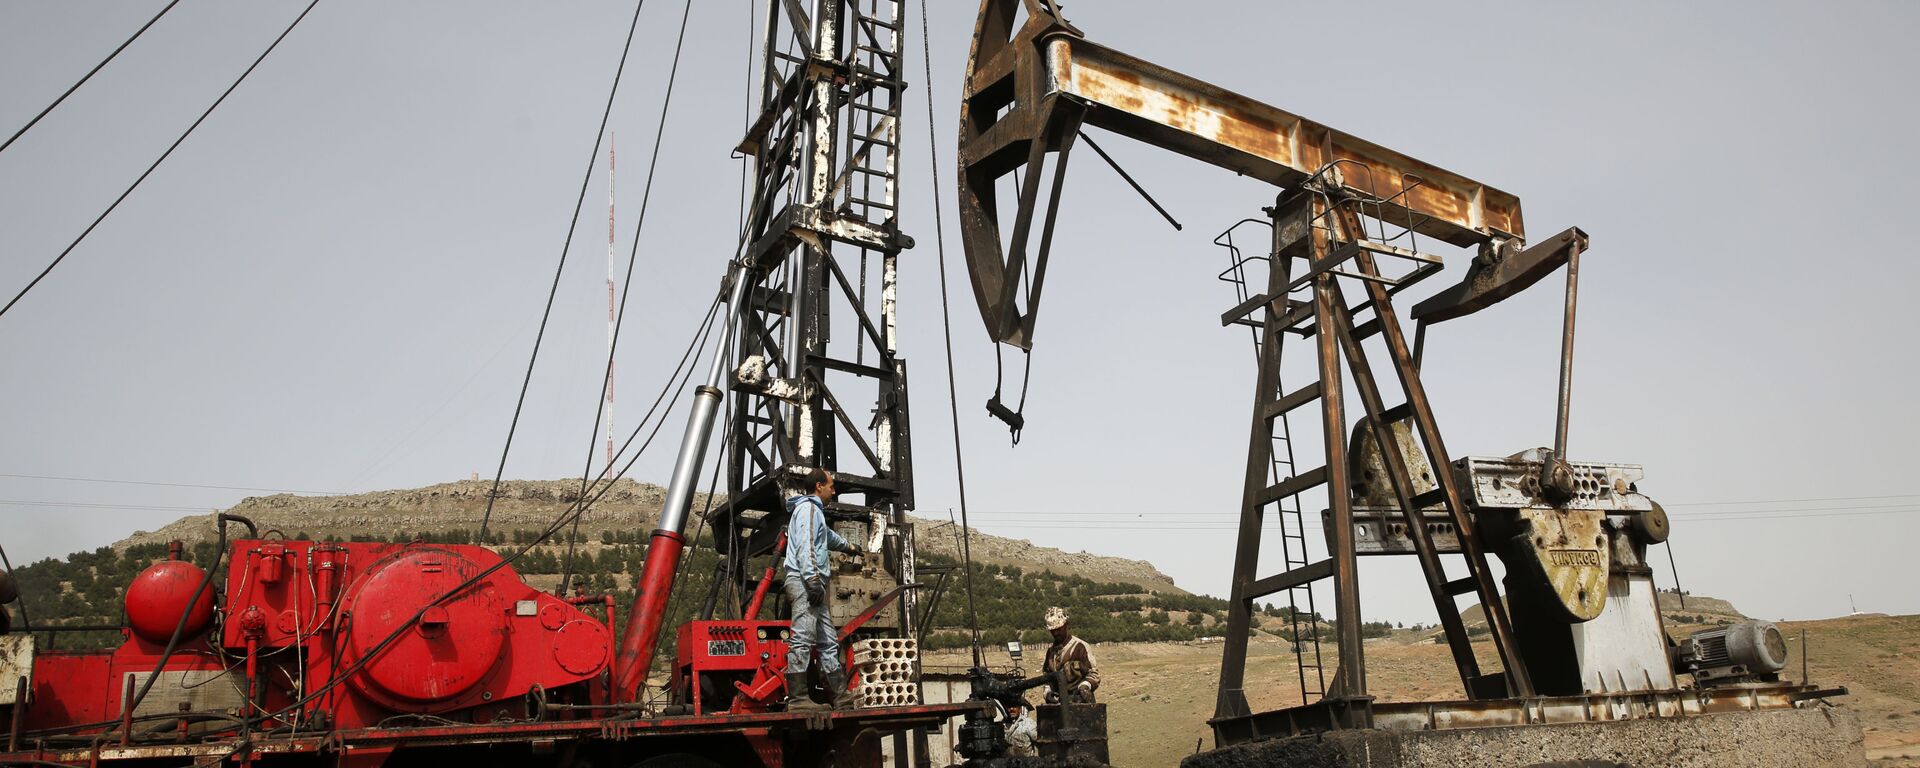 This March 27, 2018 file photo shows Syrian workers fixing pipes of an oil well at an oil field controlled by a U.S-backed Kurdish group, in Rmeilan, Hassakeh province, Syria. - Sputnik International, 1920, 09.08.2021